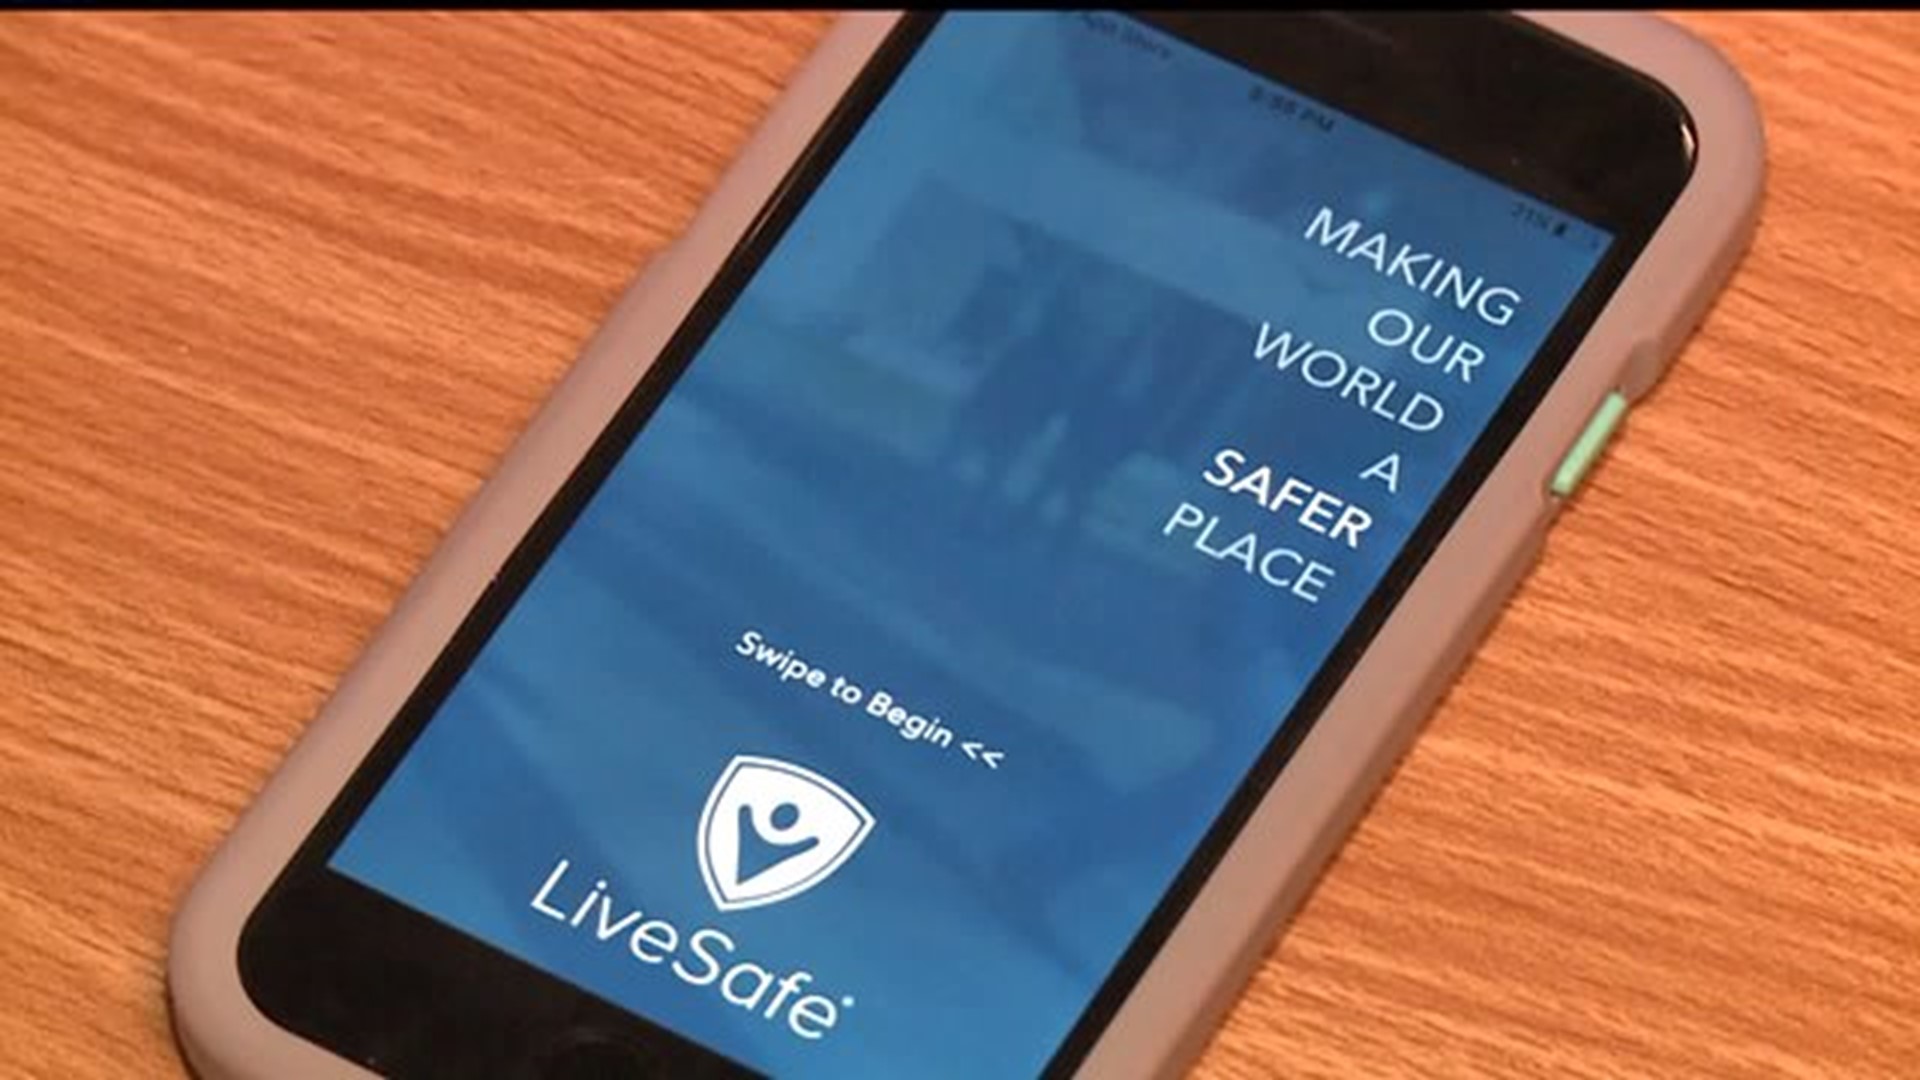 App aims to make campuses safer